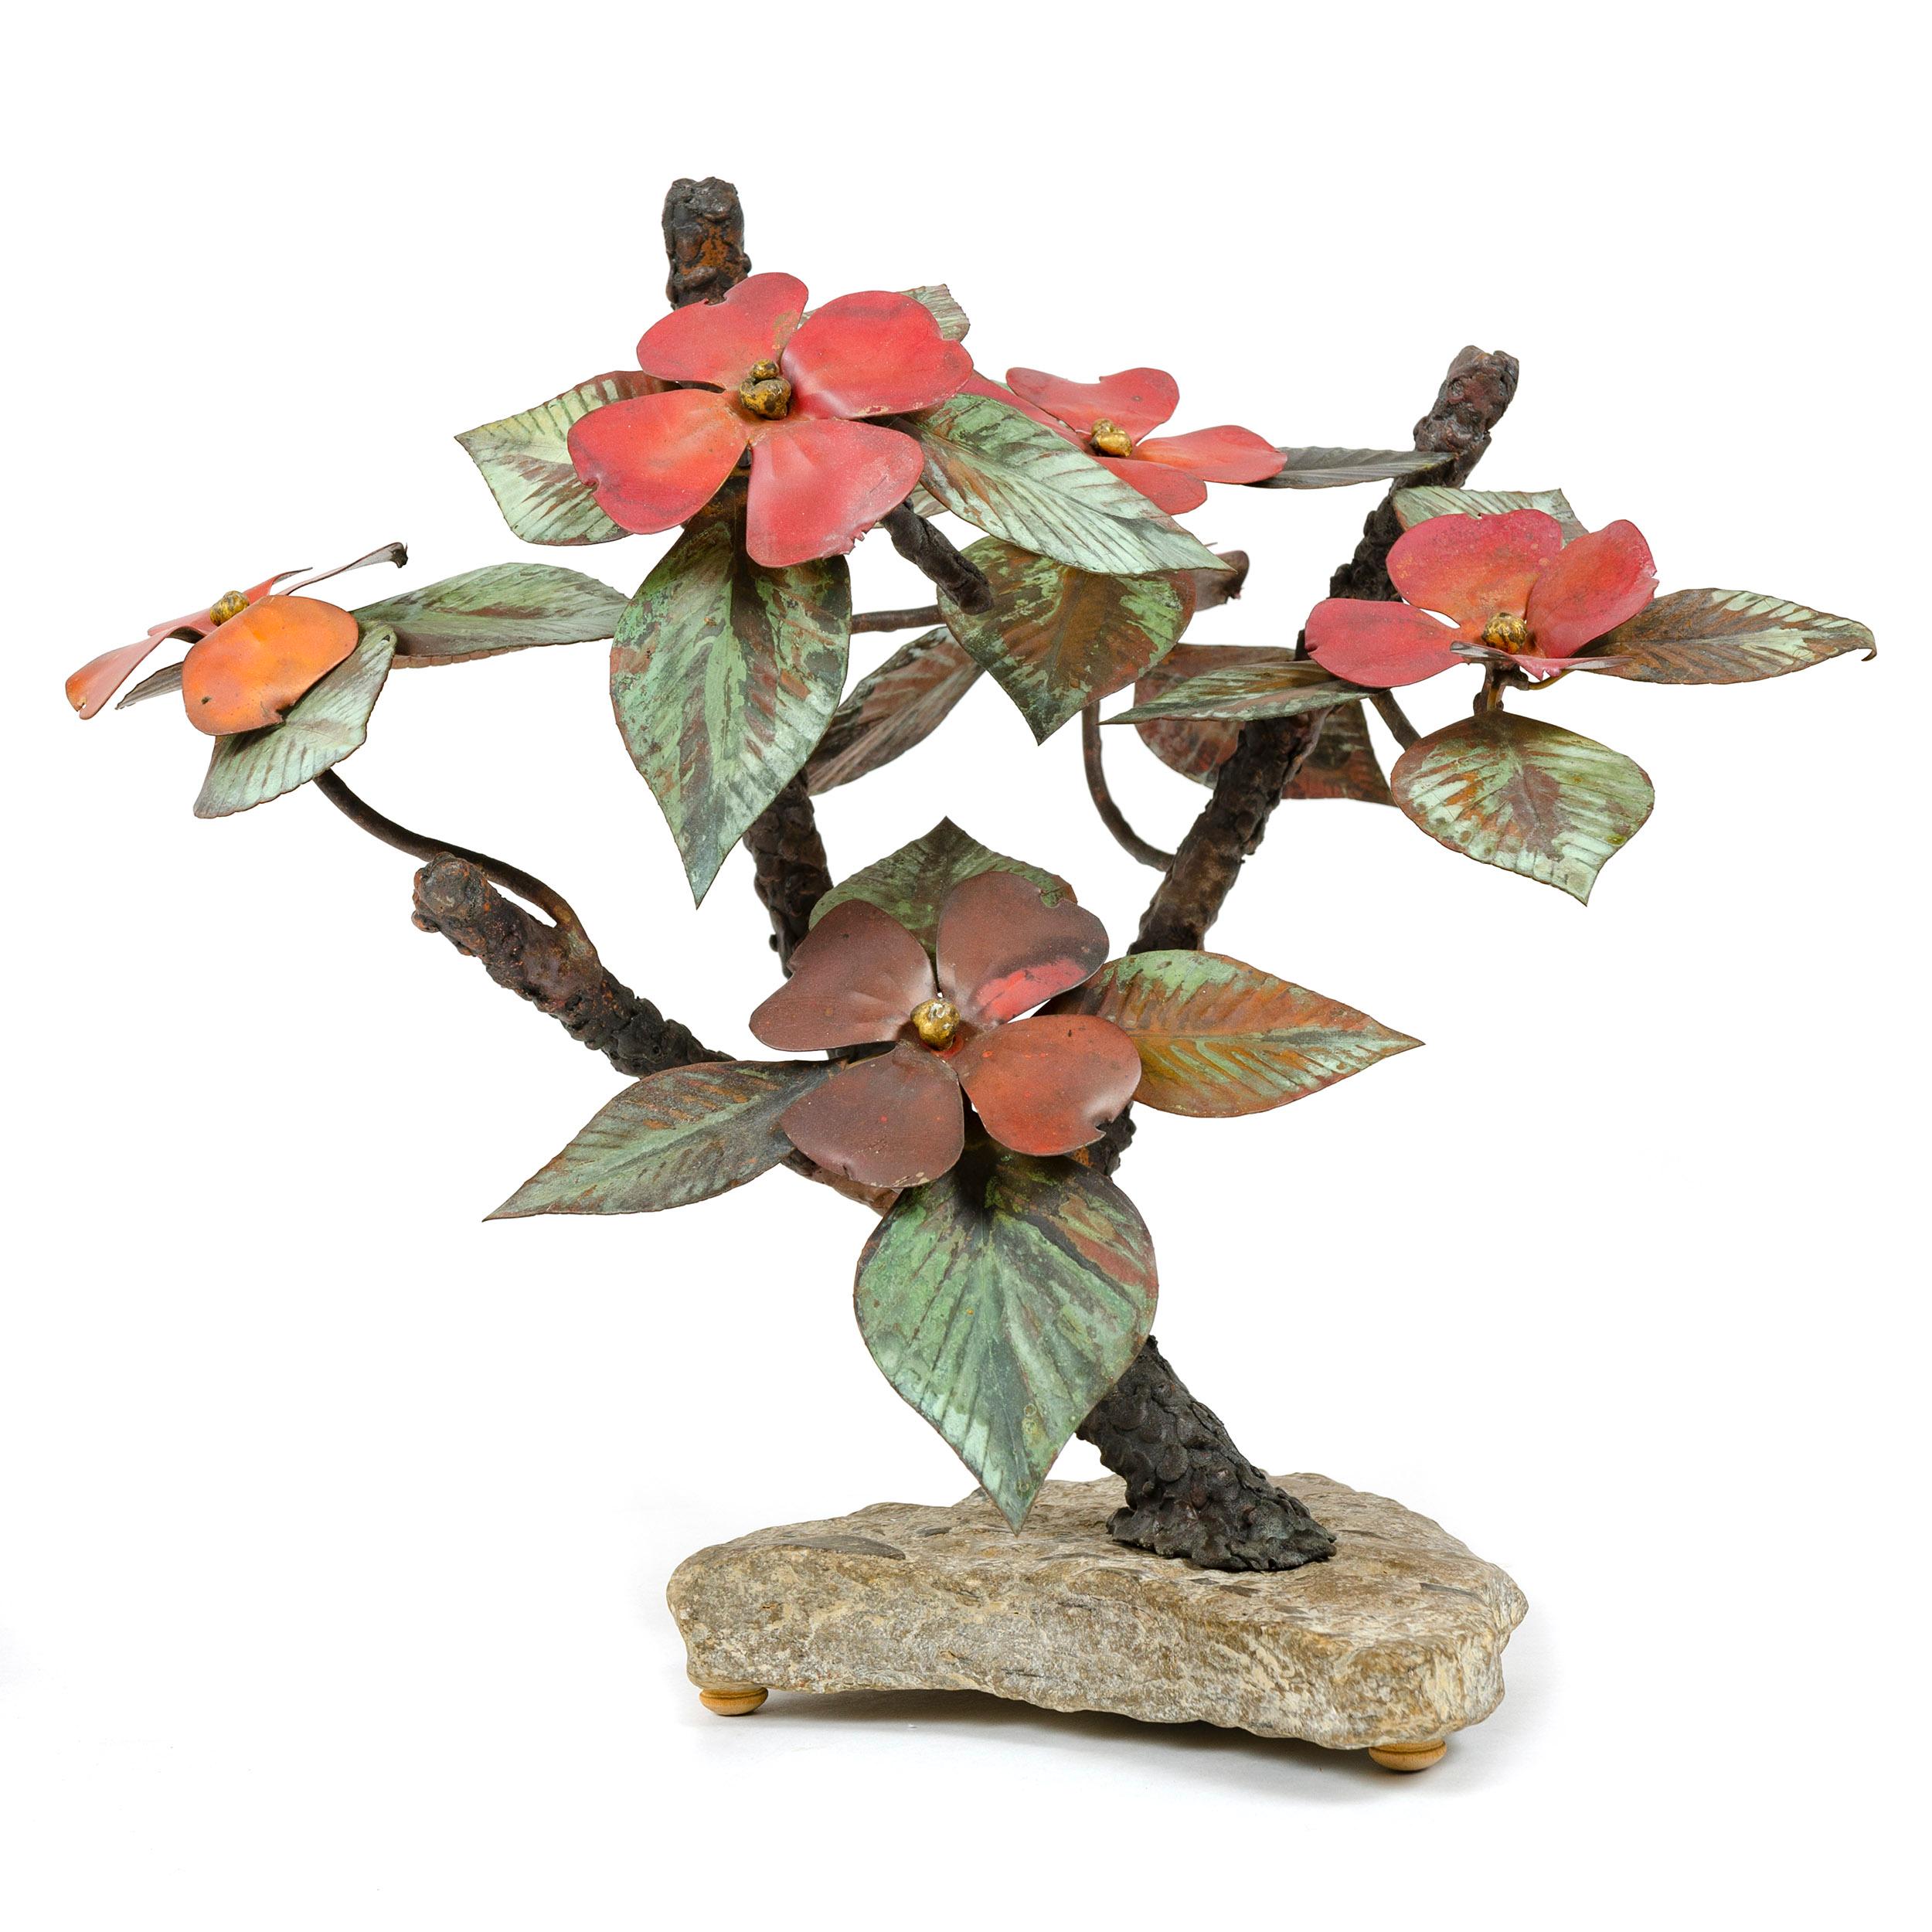 From Steck’s 'Windswept' series, this tabletop sculpture exhibits thick, textured limbs with thinner branches displaying patinated leaves and numerous four petal flowers of an oxidized, cardinal red hue the whole set on a rugged, light color